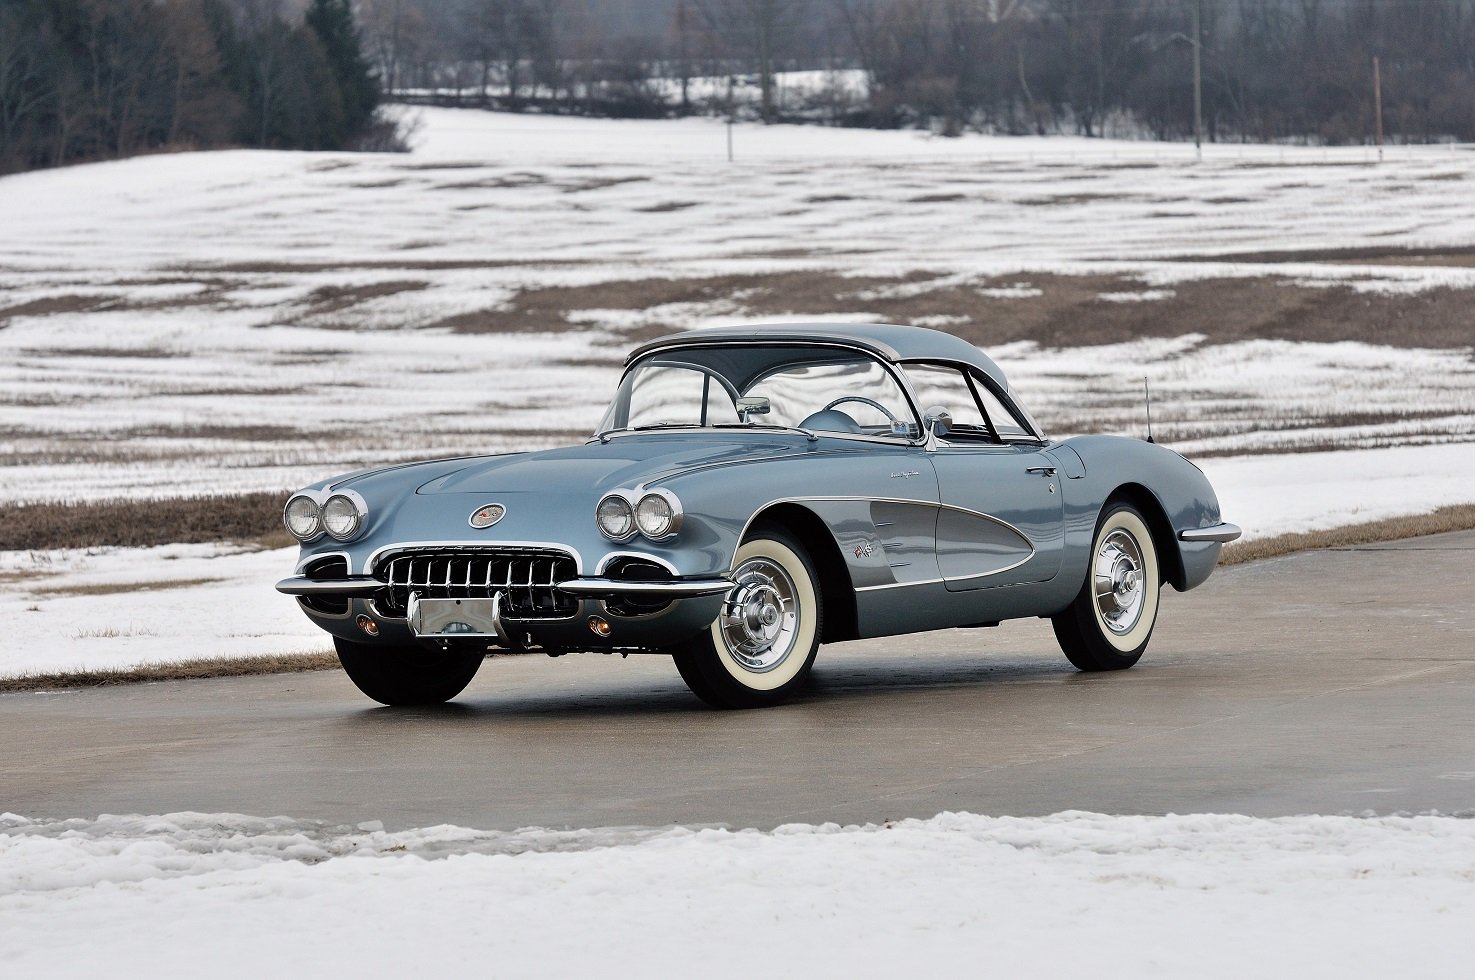 1958, Chevy, Chevrolet, Corvette,  c1 , 283 290, Hp, Fuel, Injection, Silver, Blue, Cars, Convertible, Classic Wallpaper